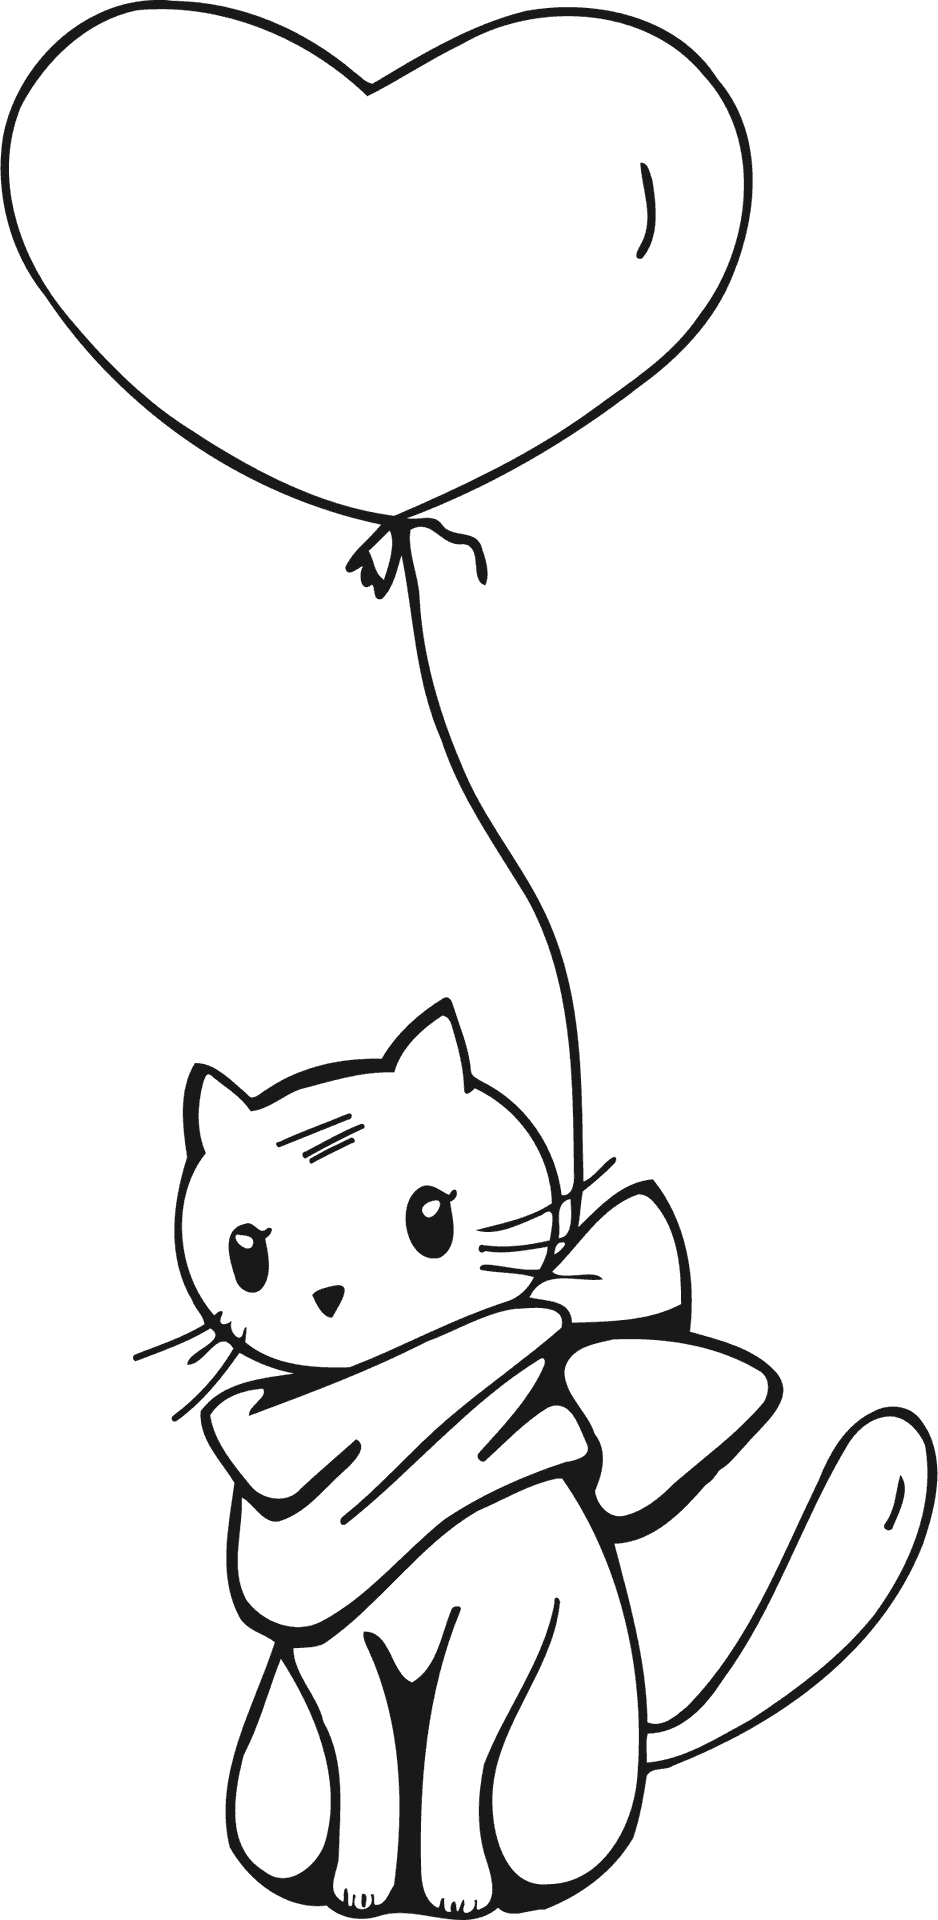 Cat_with_ Heart_ Balloon_ Sketch.png PNG